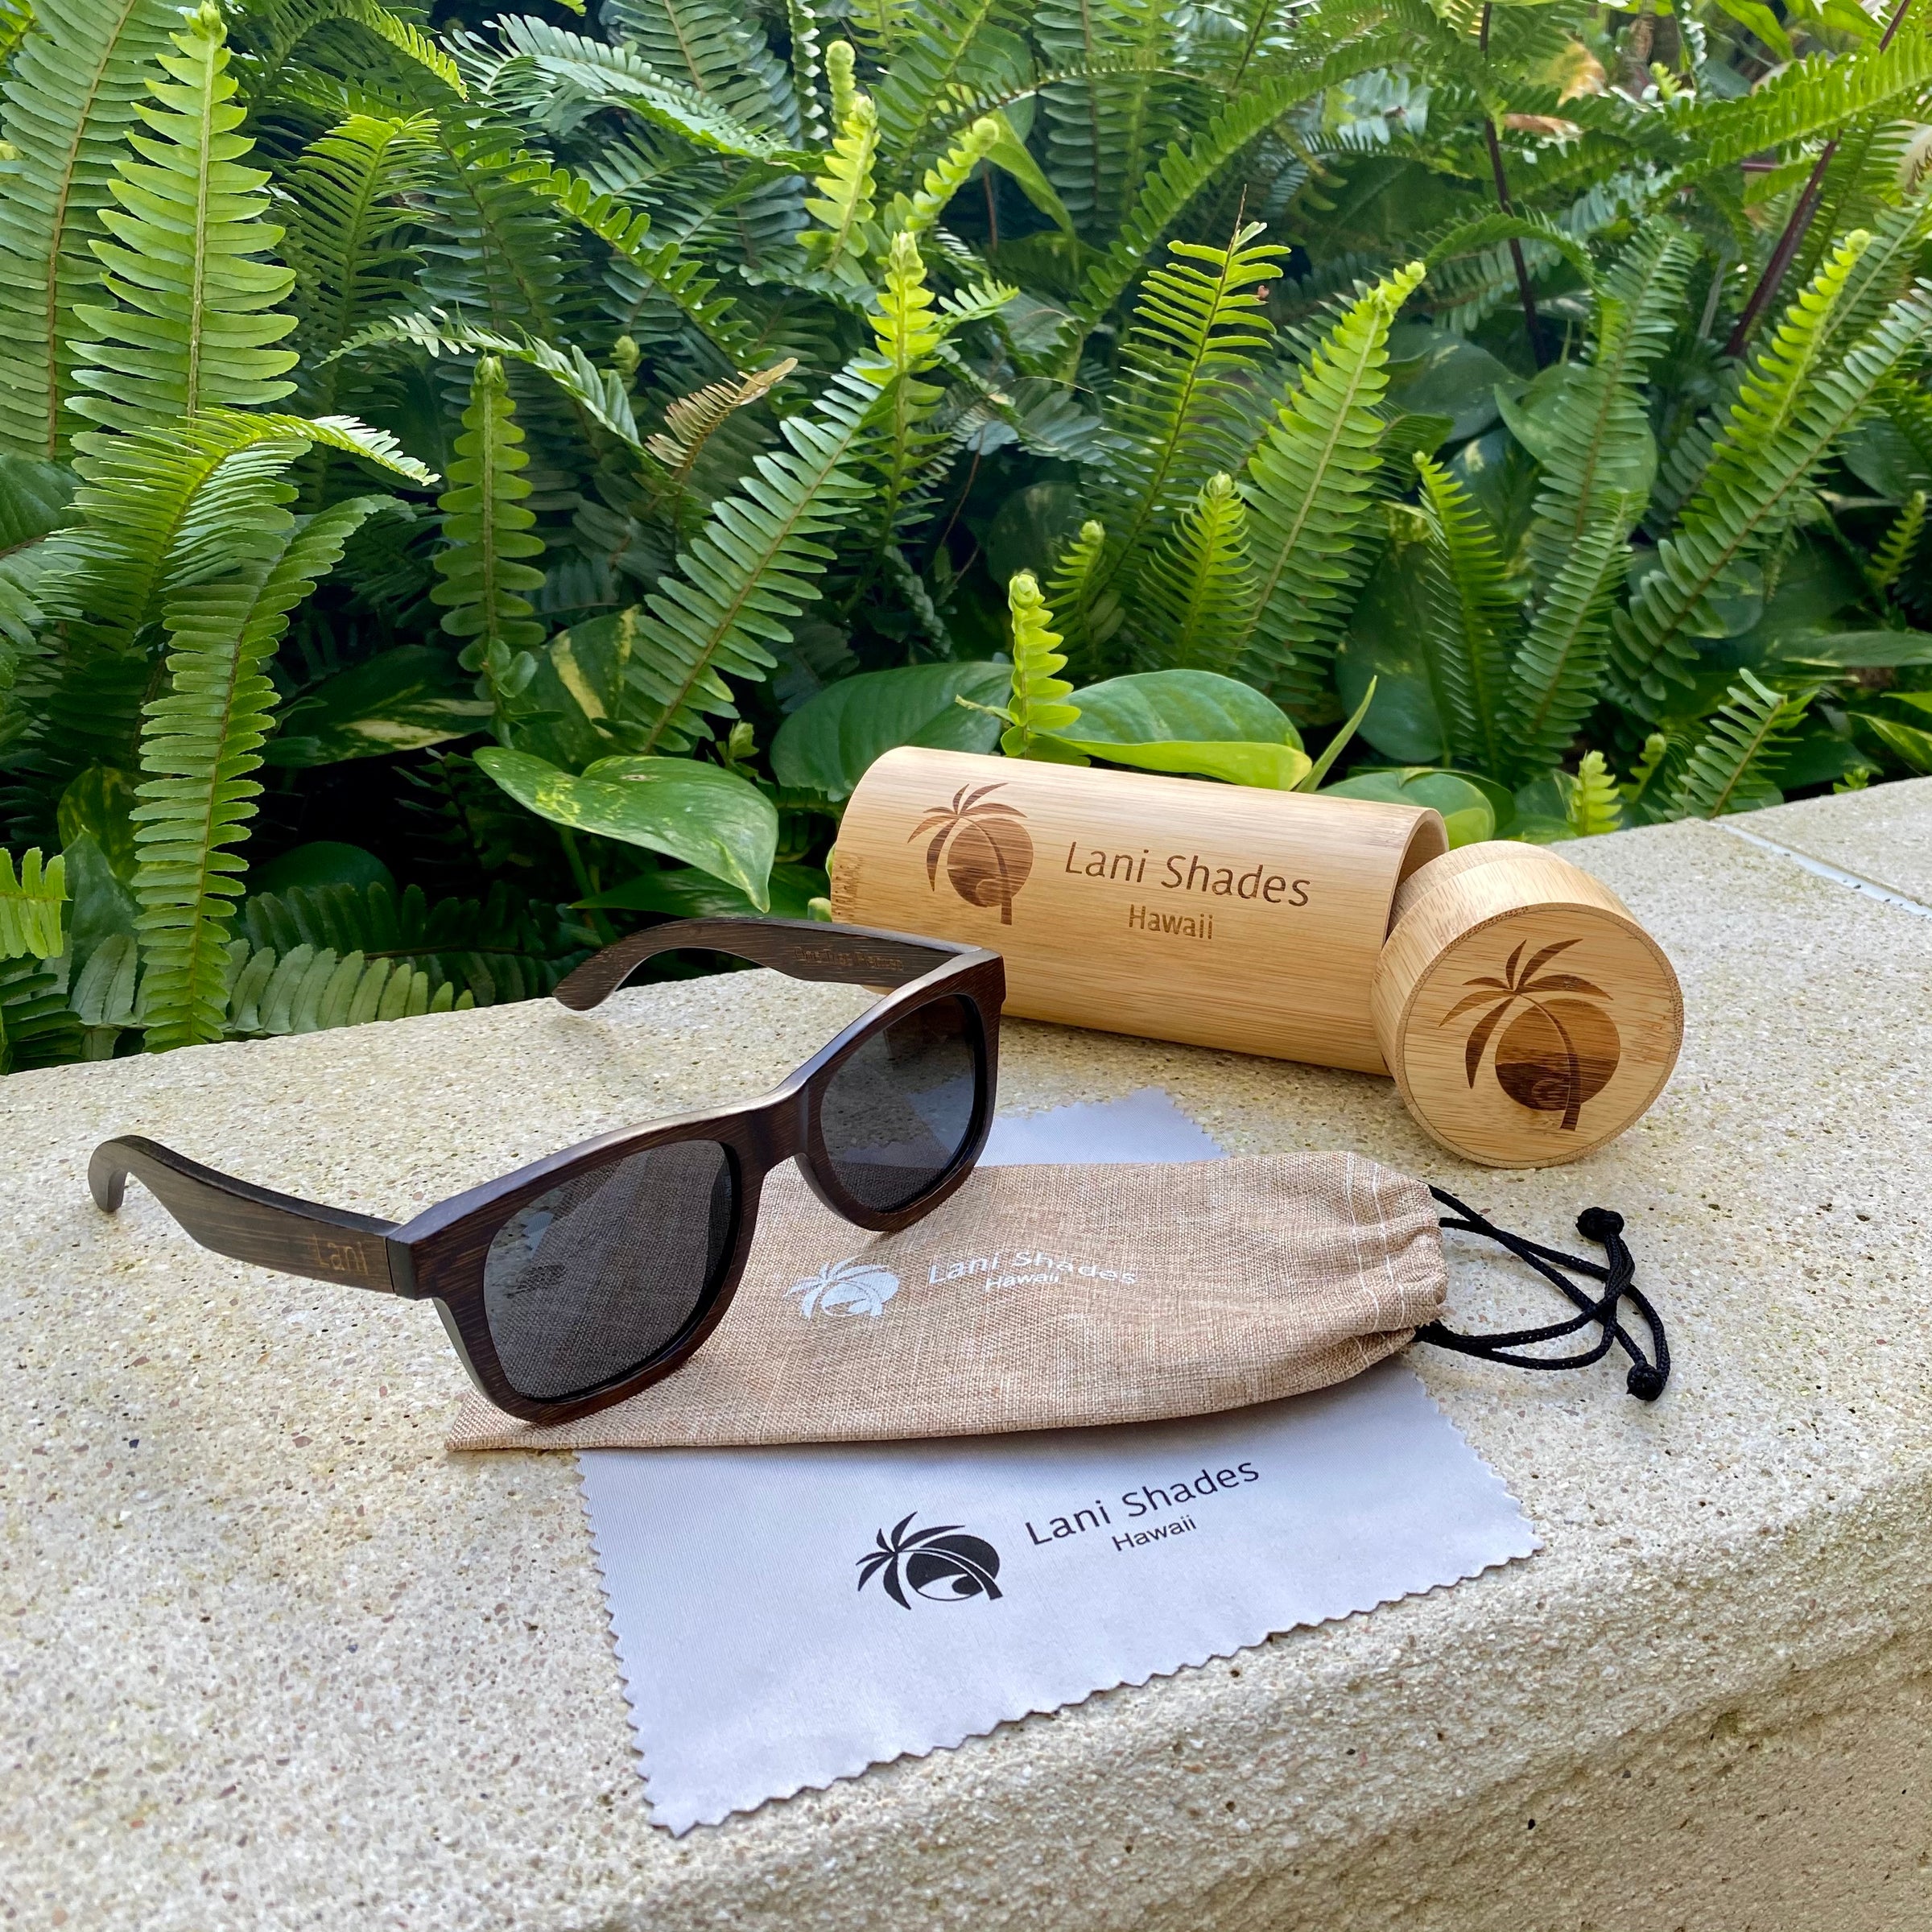 Lani Shades each come with bamboo tube case, pouch and cleaning cloth. Free shipping on all orders.